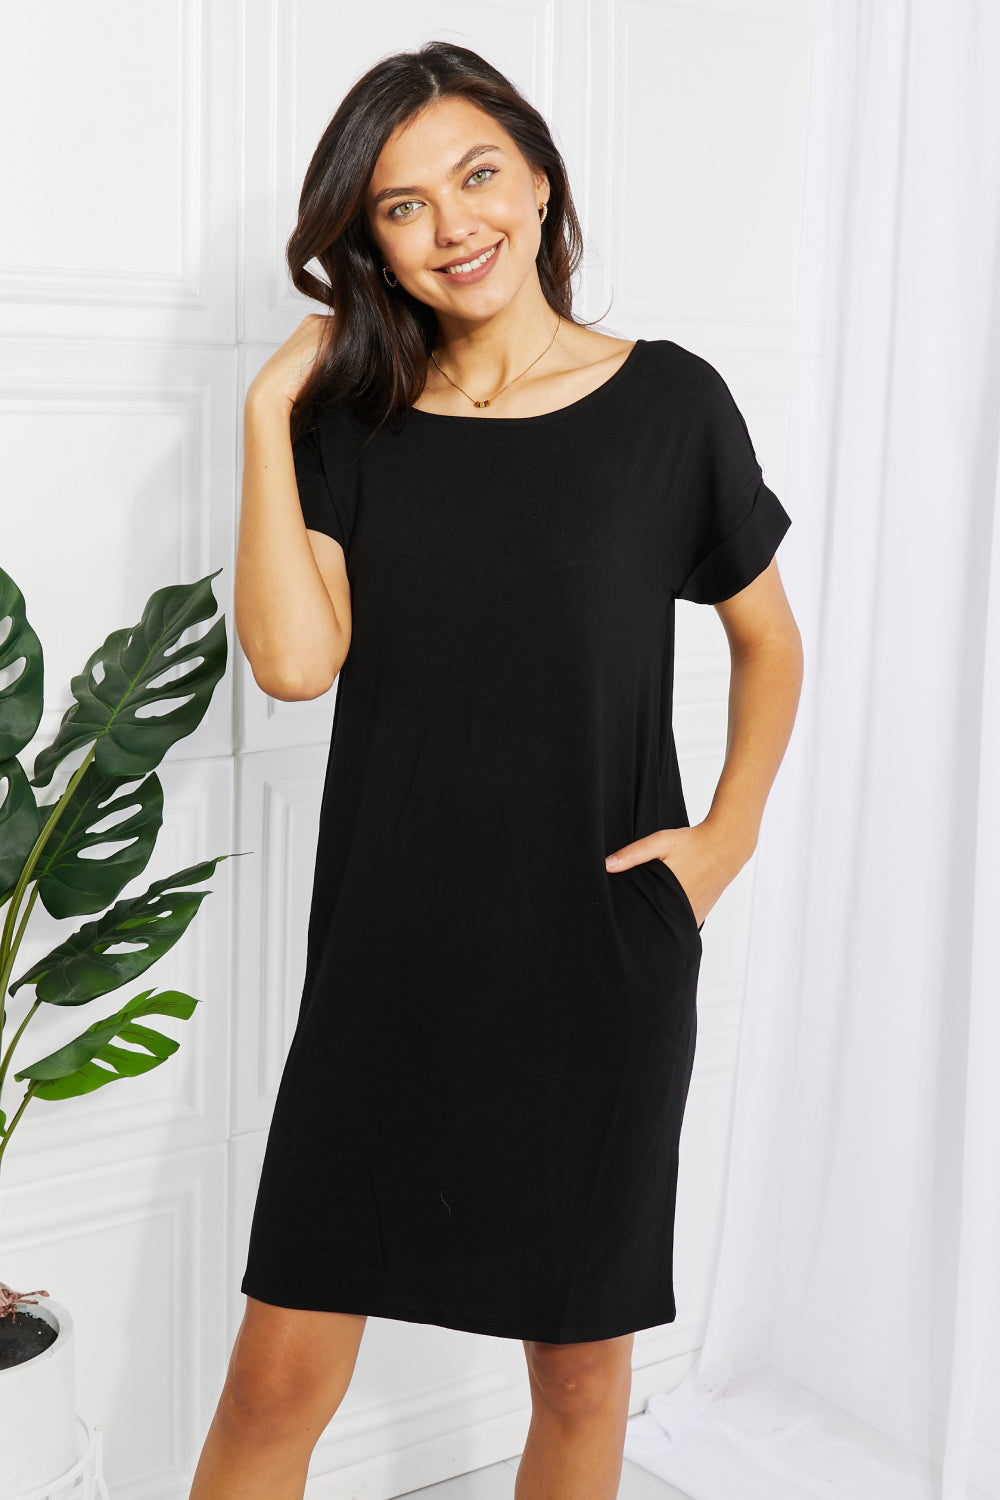 The Comfy Little Black Dress with Pockets